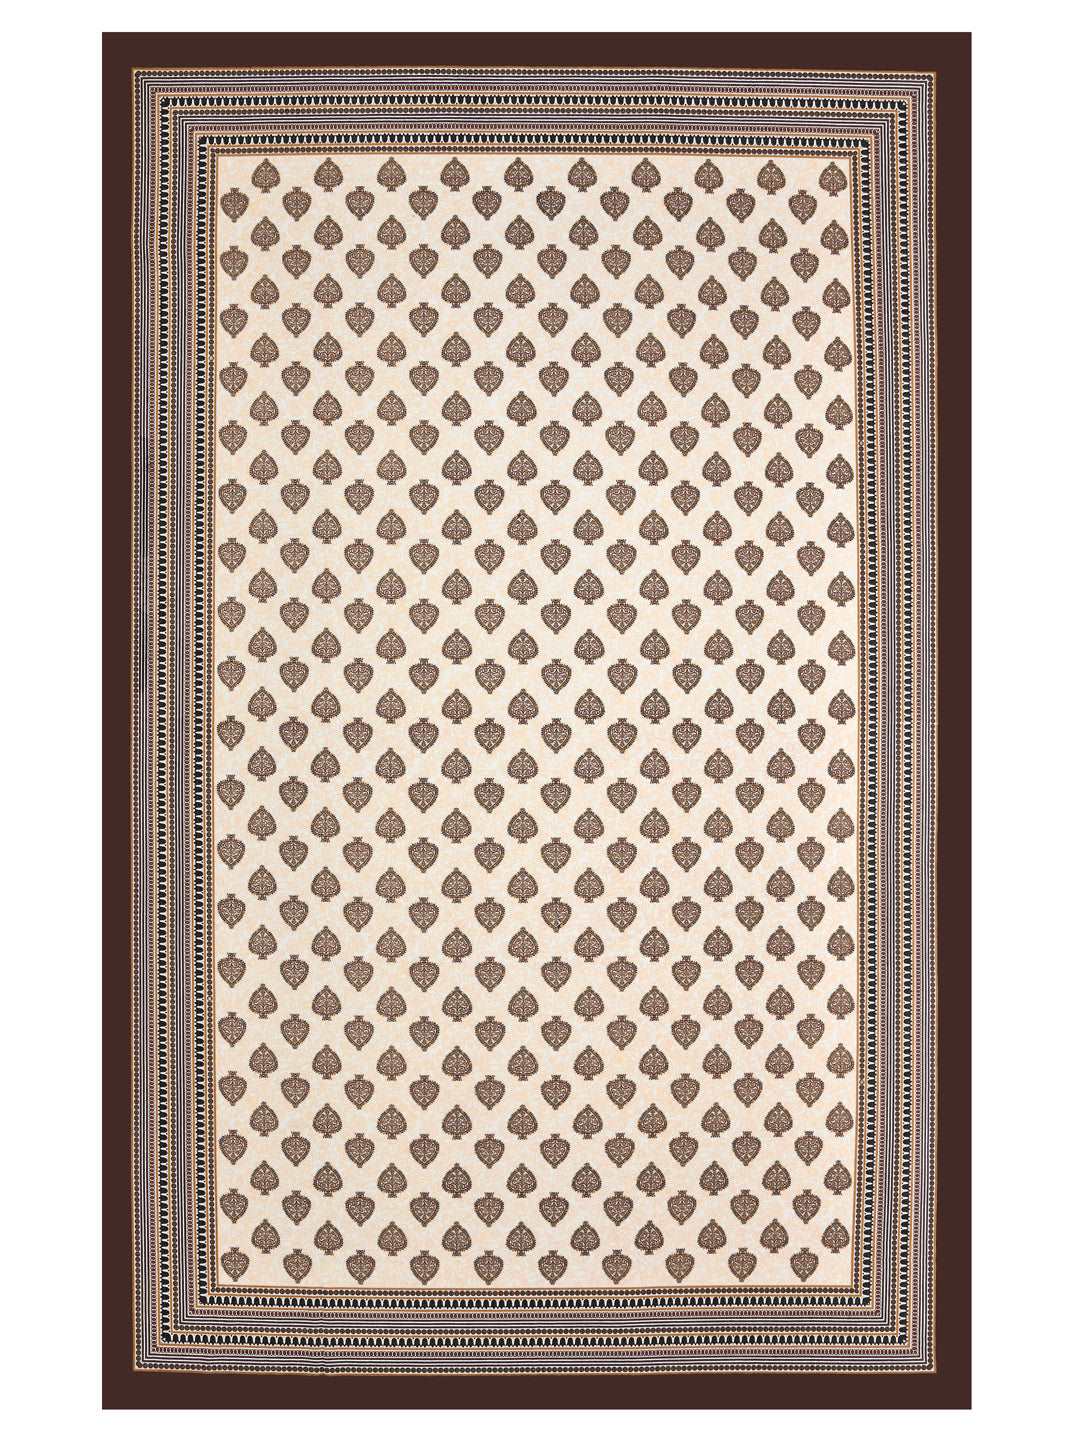 100% Cotton Table Cover 6 Seater, Brown & Golden